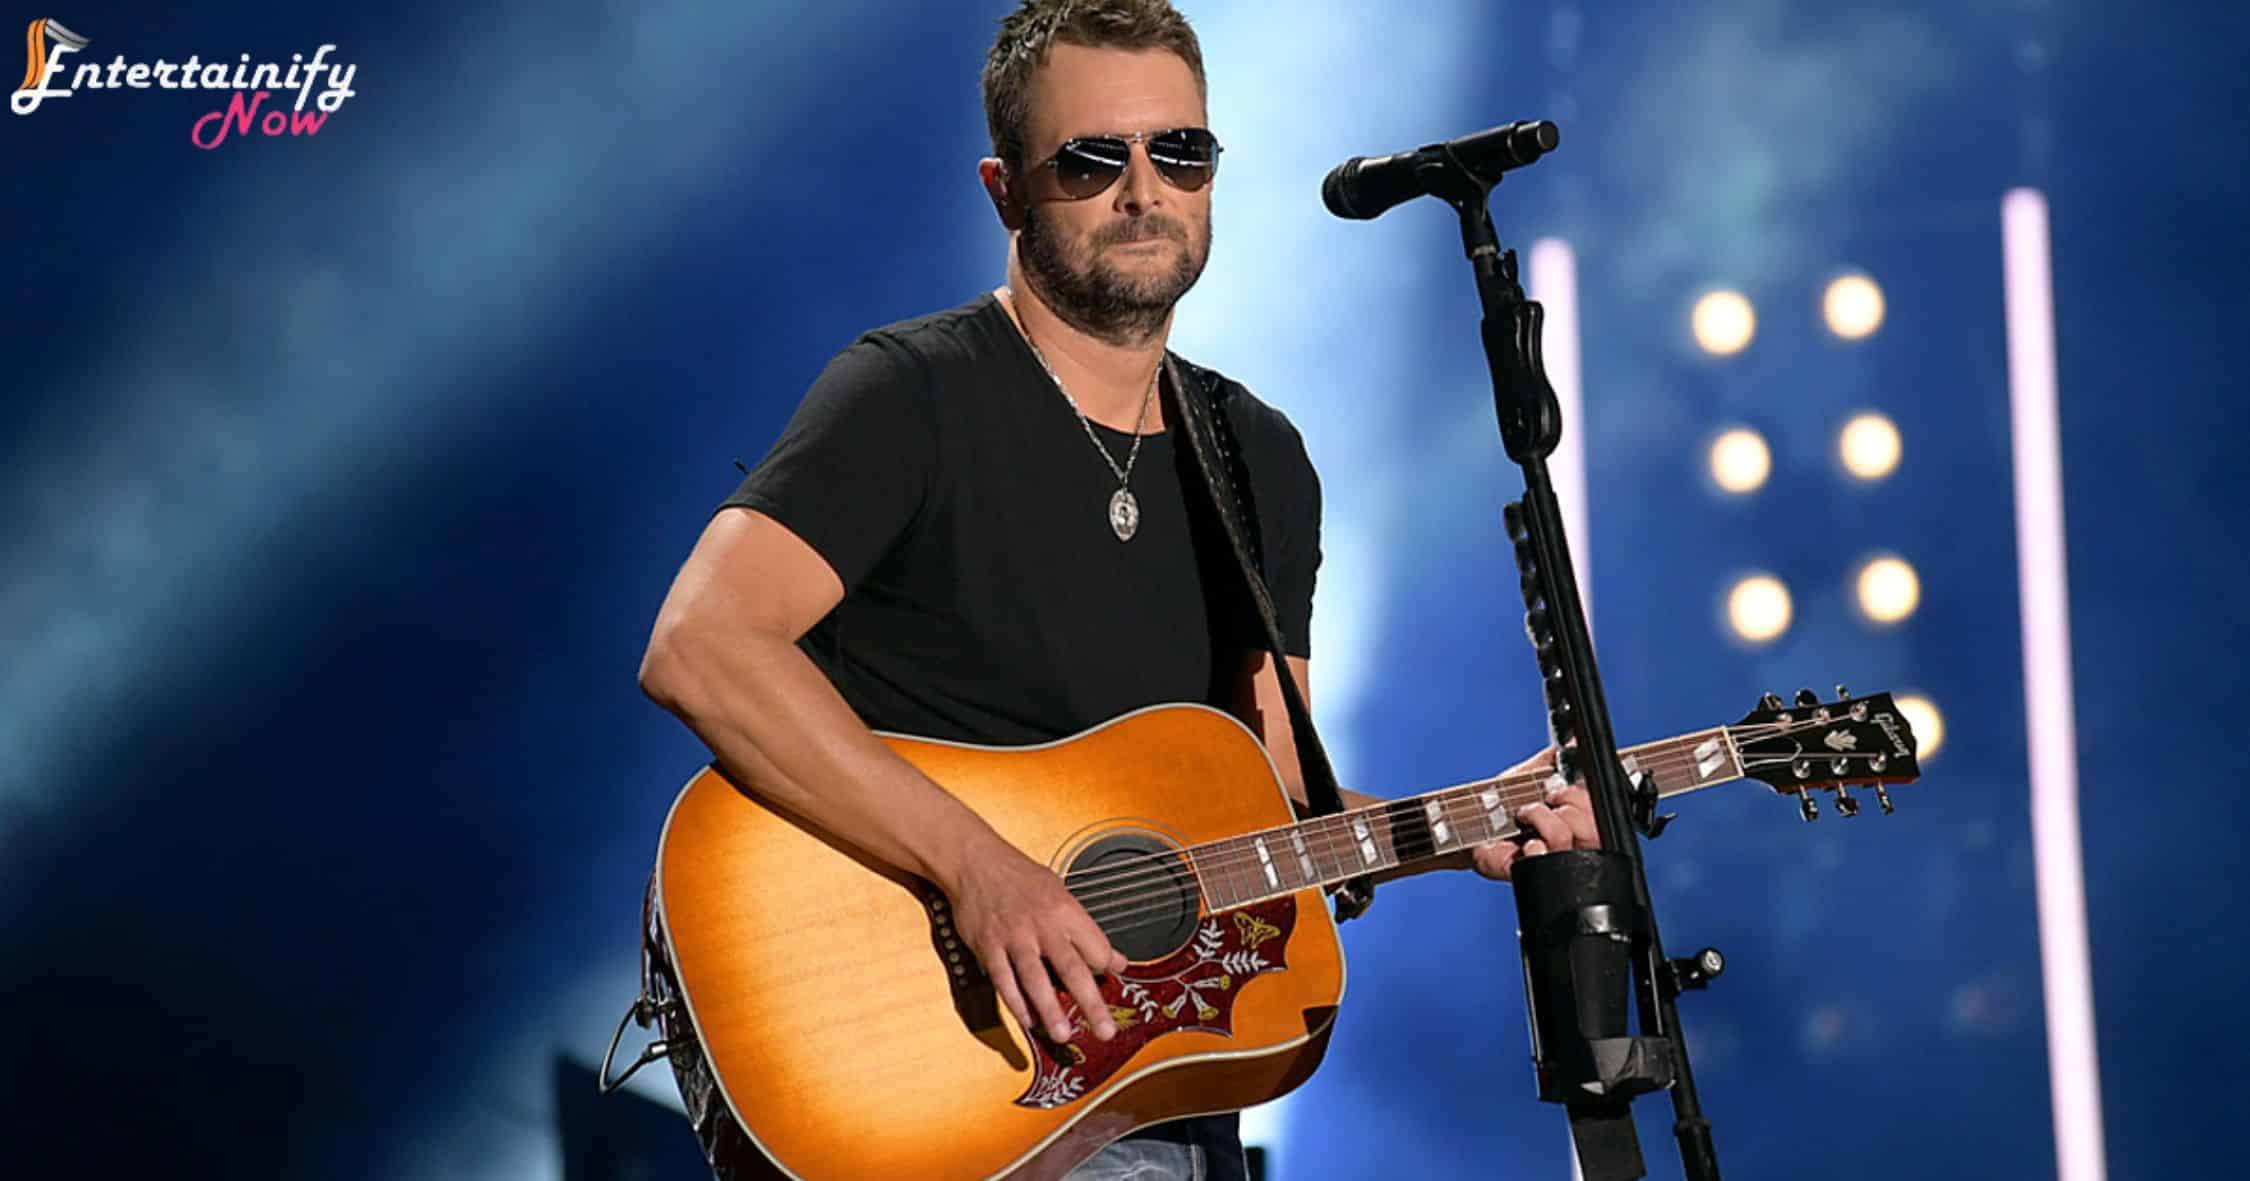 Has Eric Church Ever Won Entertainer Of The Year